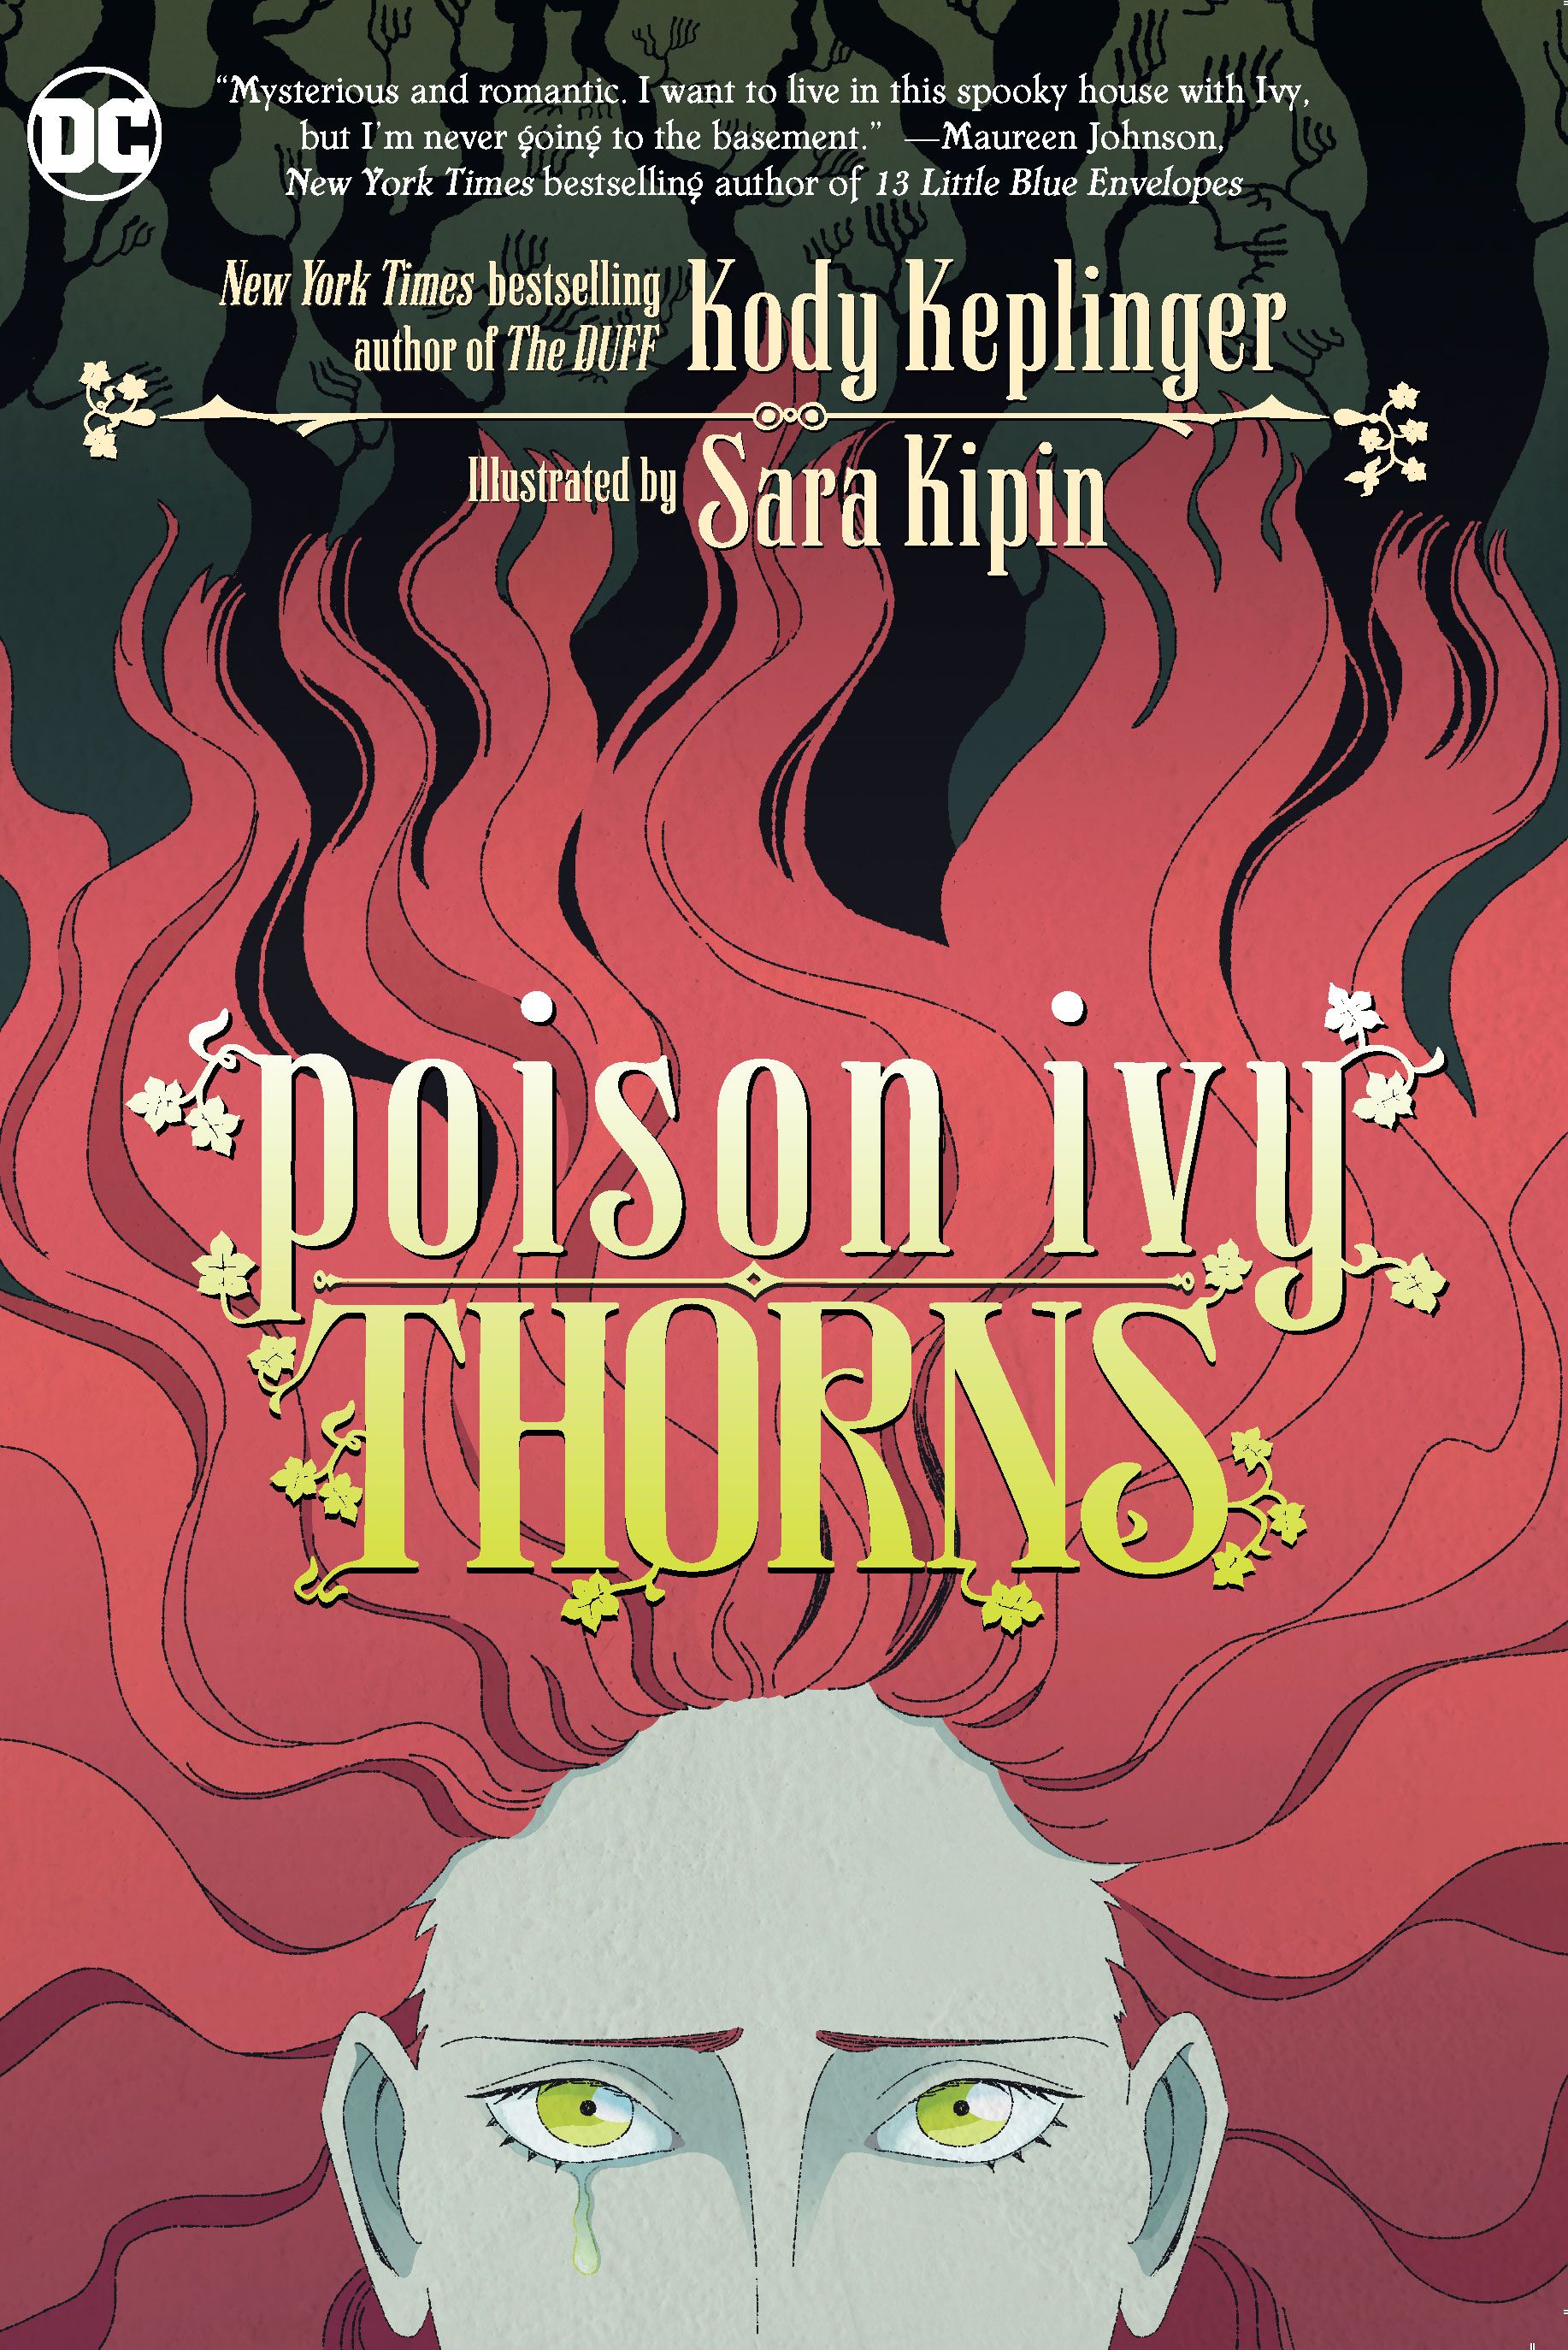 poison ivy thorns graphic novel cover